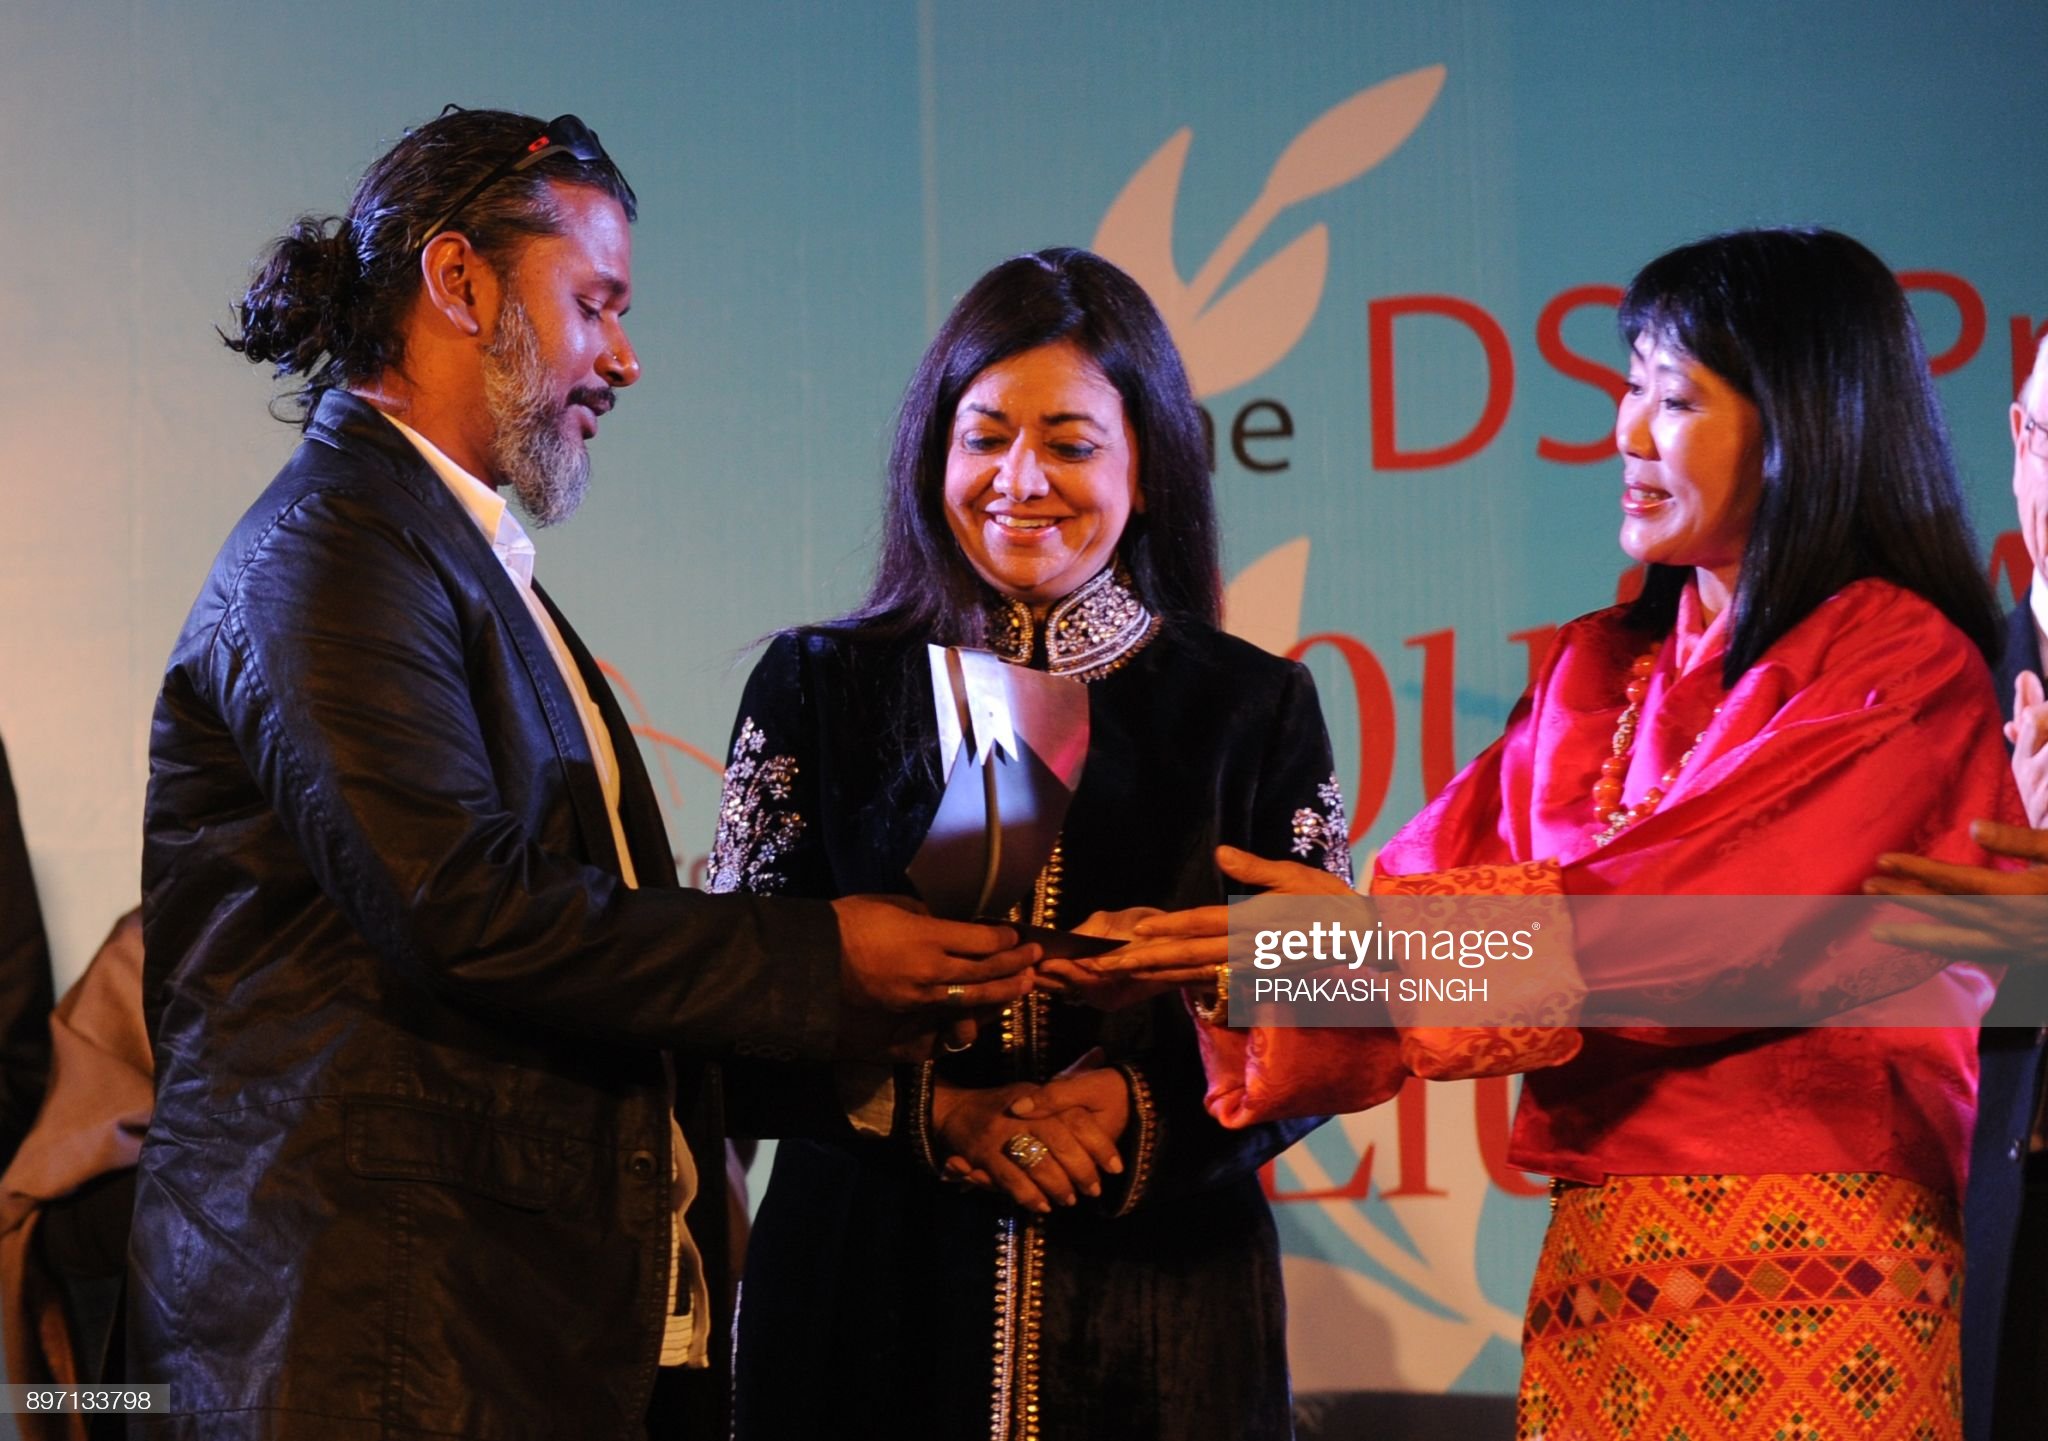 Queen Mother of Bhutan Ashi Sangay Choden Wangchuck (R) presents the DSC Prize for South Asian Literature 2012 to Sri Lankan debut Novelist Shehan Karunatilaka (L) for his book 'Chinaman' during the DSC Jaipur Literature Festival (JLF) in Jaipur on January 21, 2012. Sri Lankan debut Novelist Shehan Karunatilaka won the US$50,000  DSC Prize for South Asian Literature 2012 his book 'Chinaman', a novel that explores cricket as a metaphor to uncover a lost life and a lost history . AFP PHOTO / Prakash SINGH / AFP PHOTO / PRAKASH SINGH        (Photo credit should read PRAKASH SINGH/AFP via Getty Images)